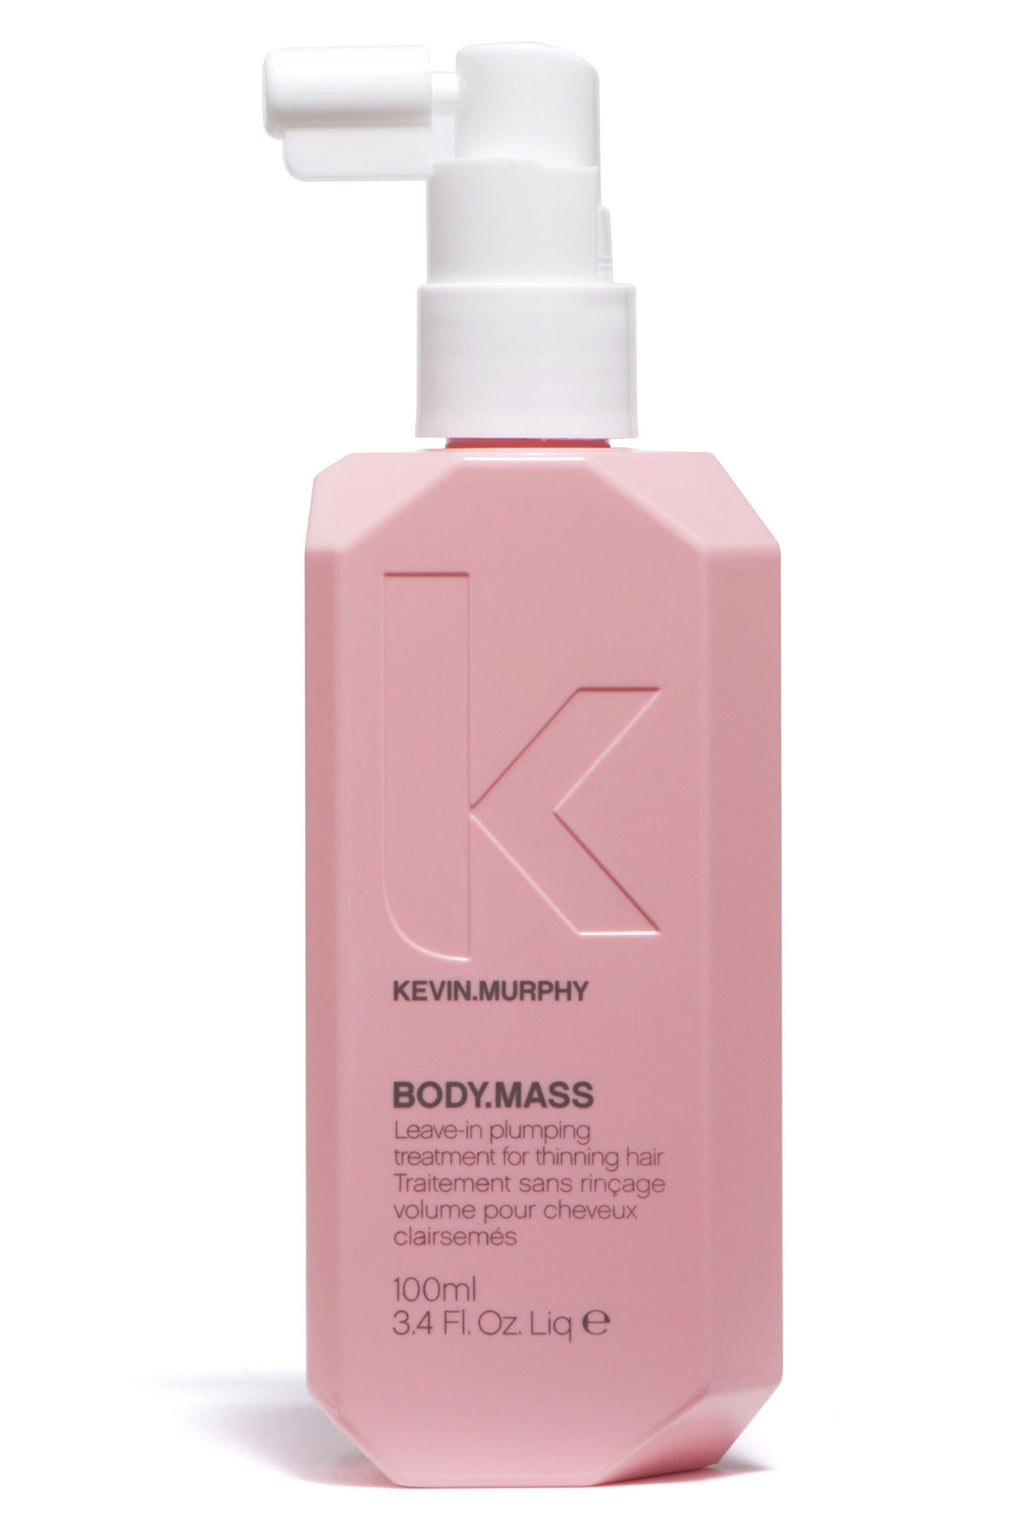 Kevin Murphy Body Mass Leave in plumping treatment for thinning hair 100ml